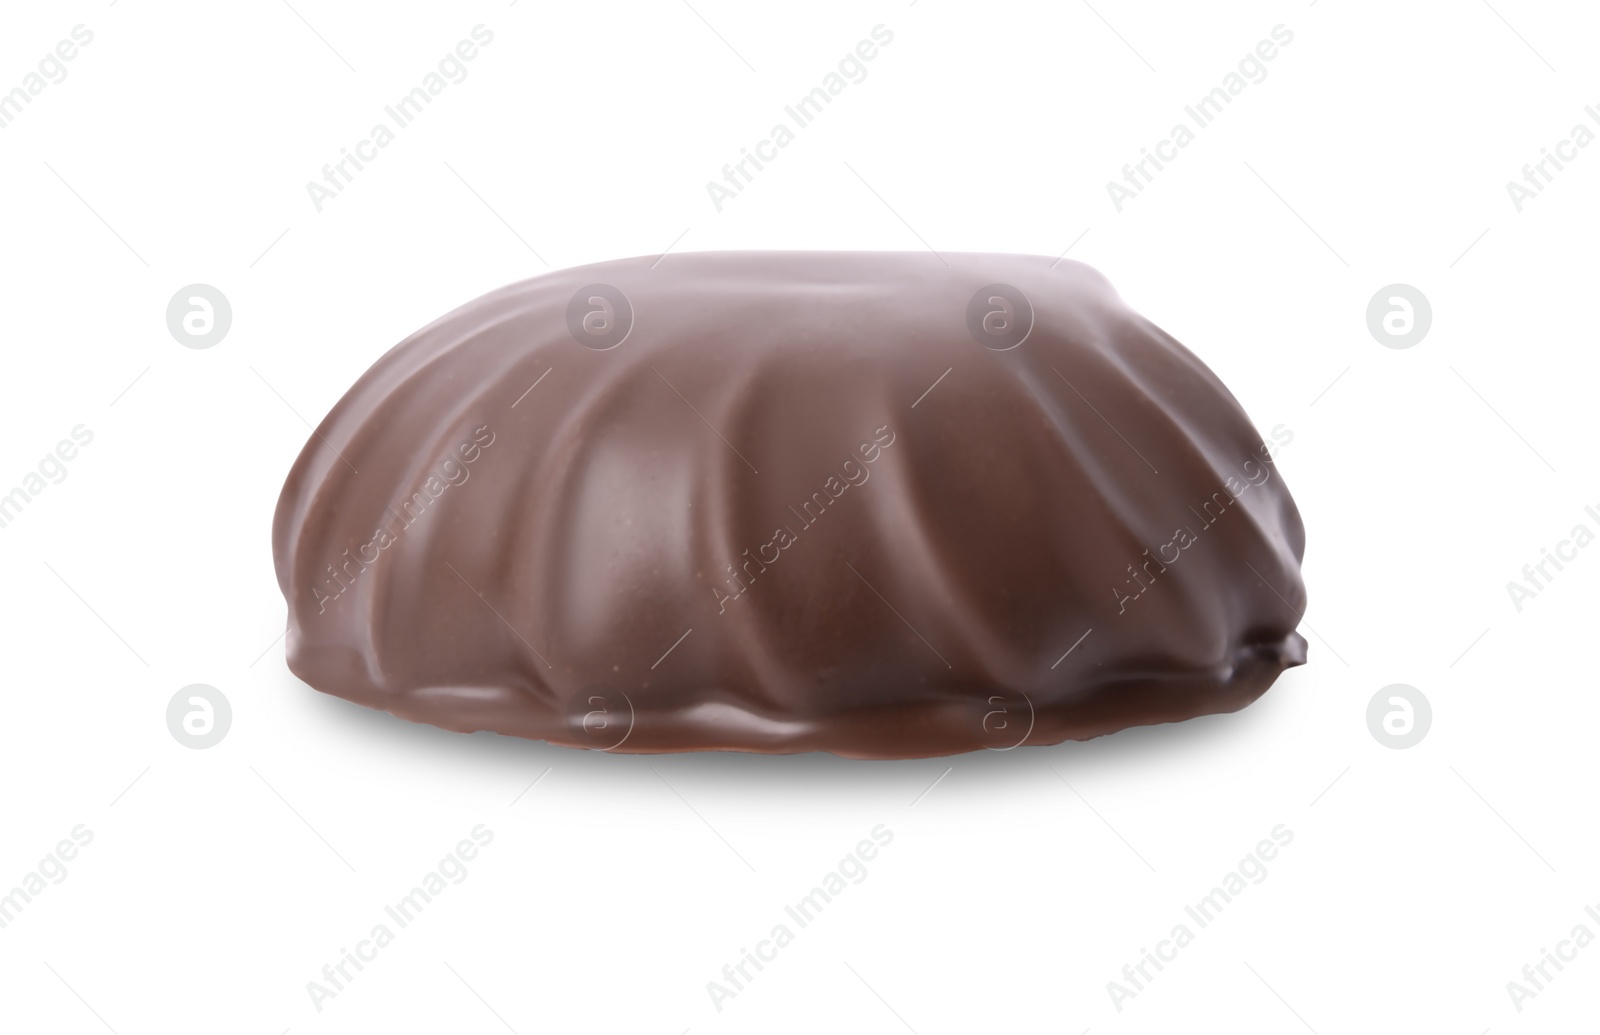 Photo of Delicious chocolate covered marshmallow isolated on white